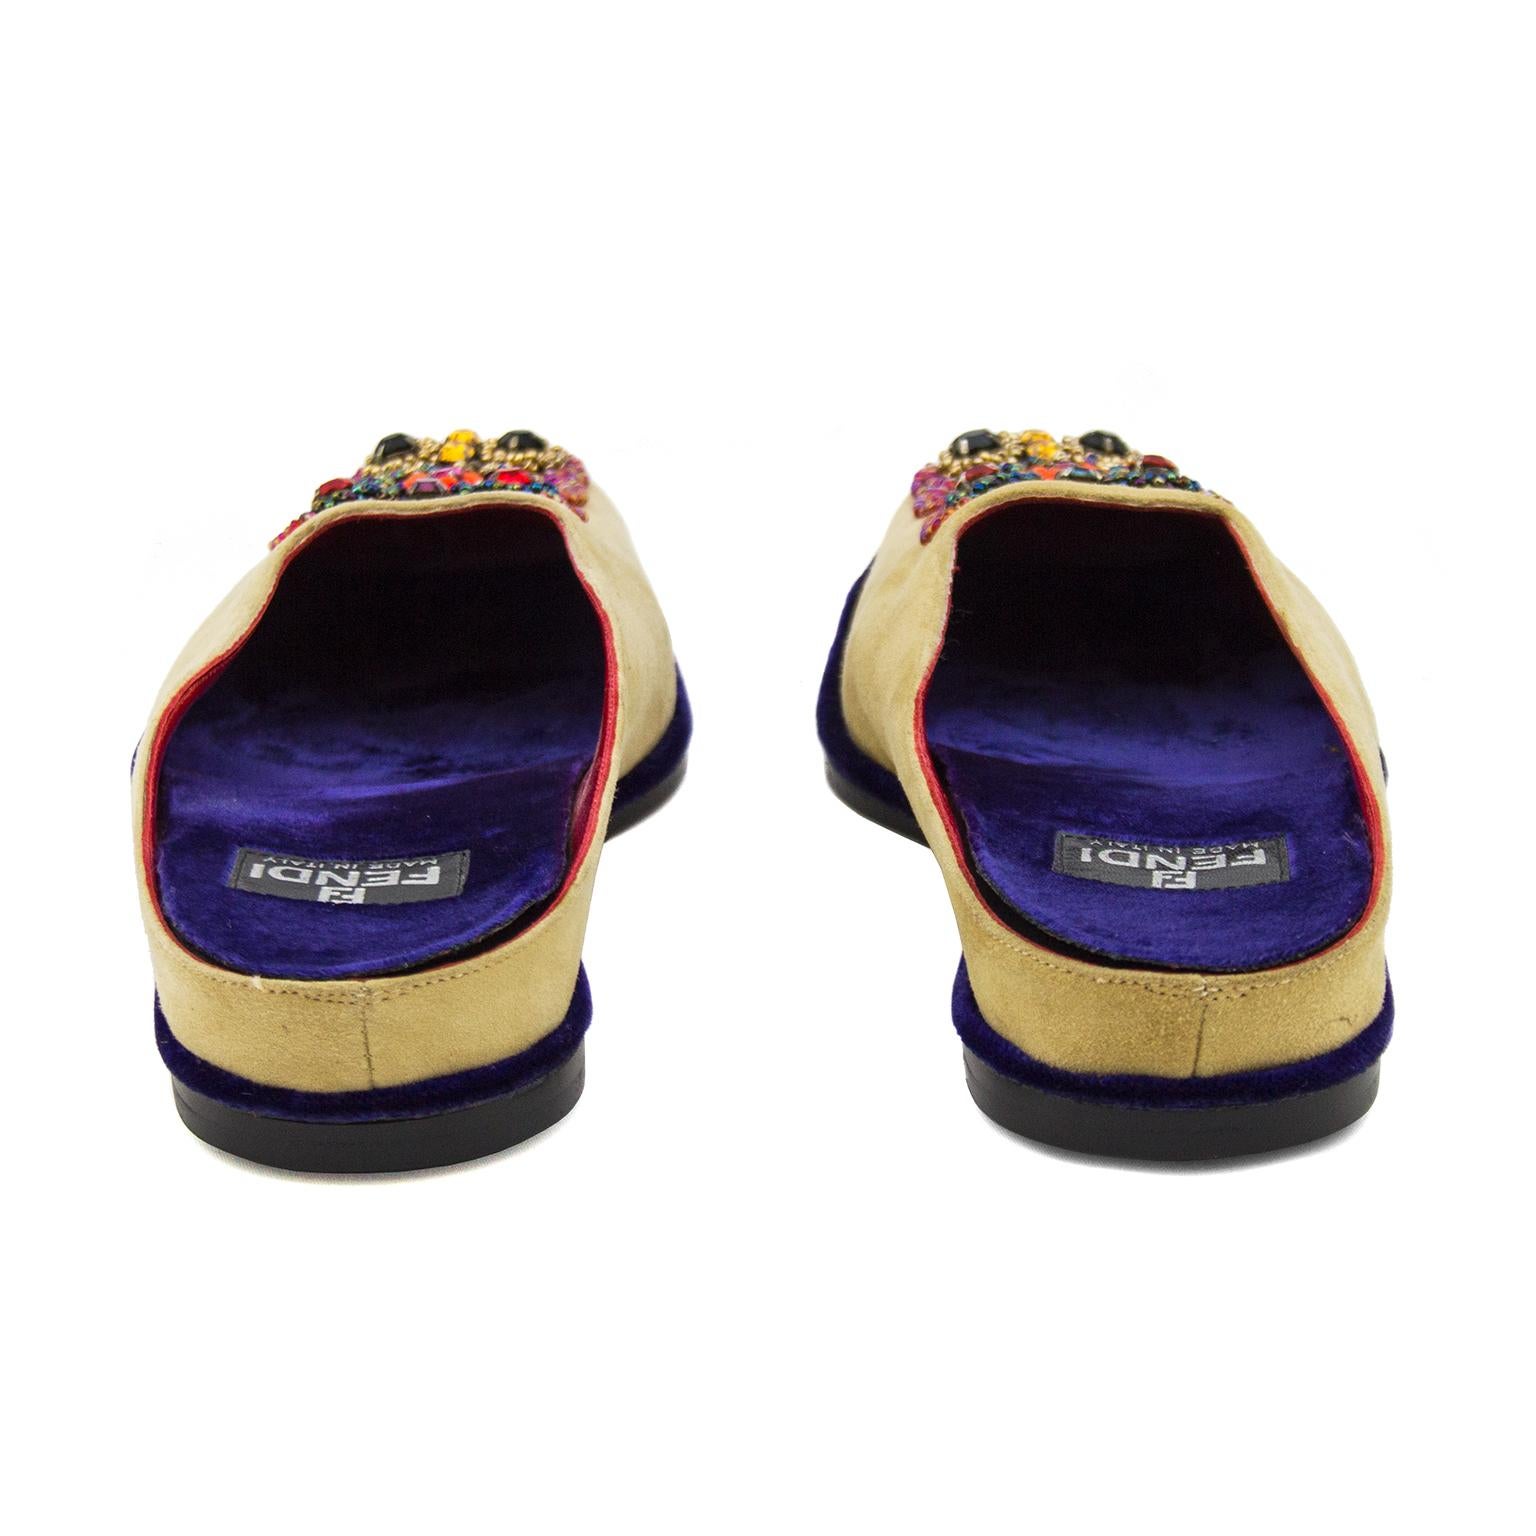 Beautifully beaded light tan suede Fendi slipper slides from the mid 2000s. Inspired by traditional Indian Jootis style shoes, they have an intricately beaded toe design and purple velvet insoles and trim. The soles of the shoes are in immaculate,